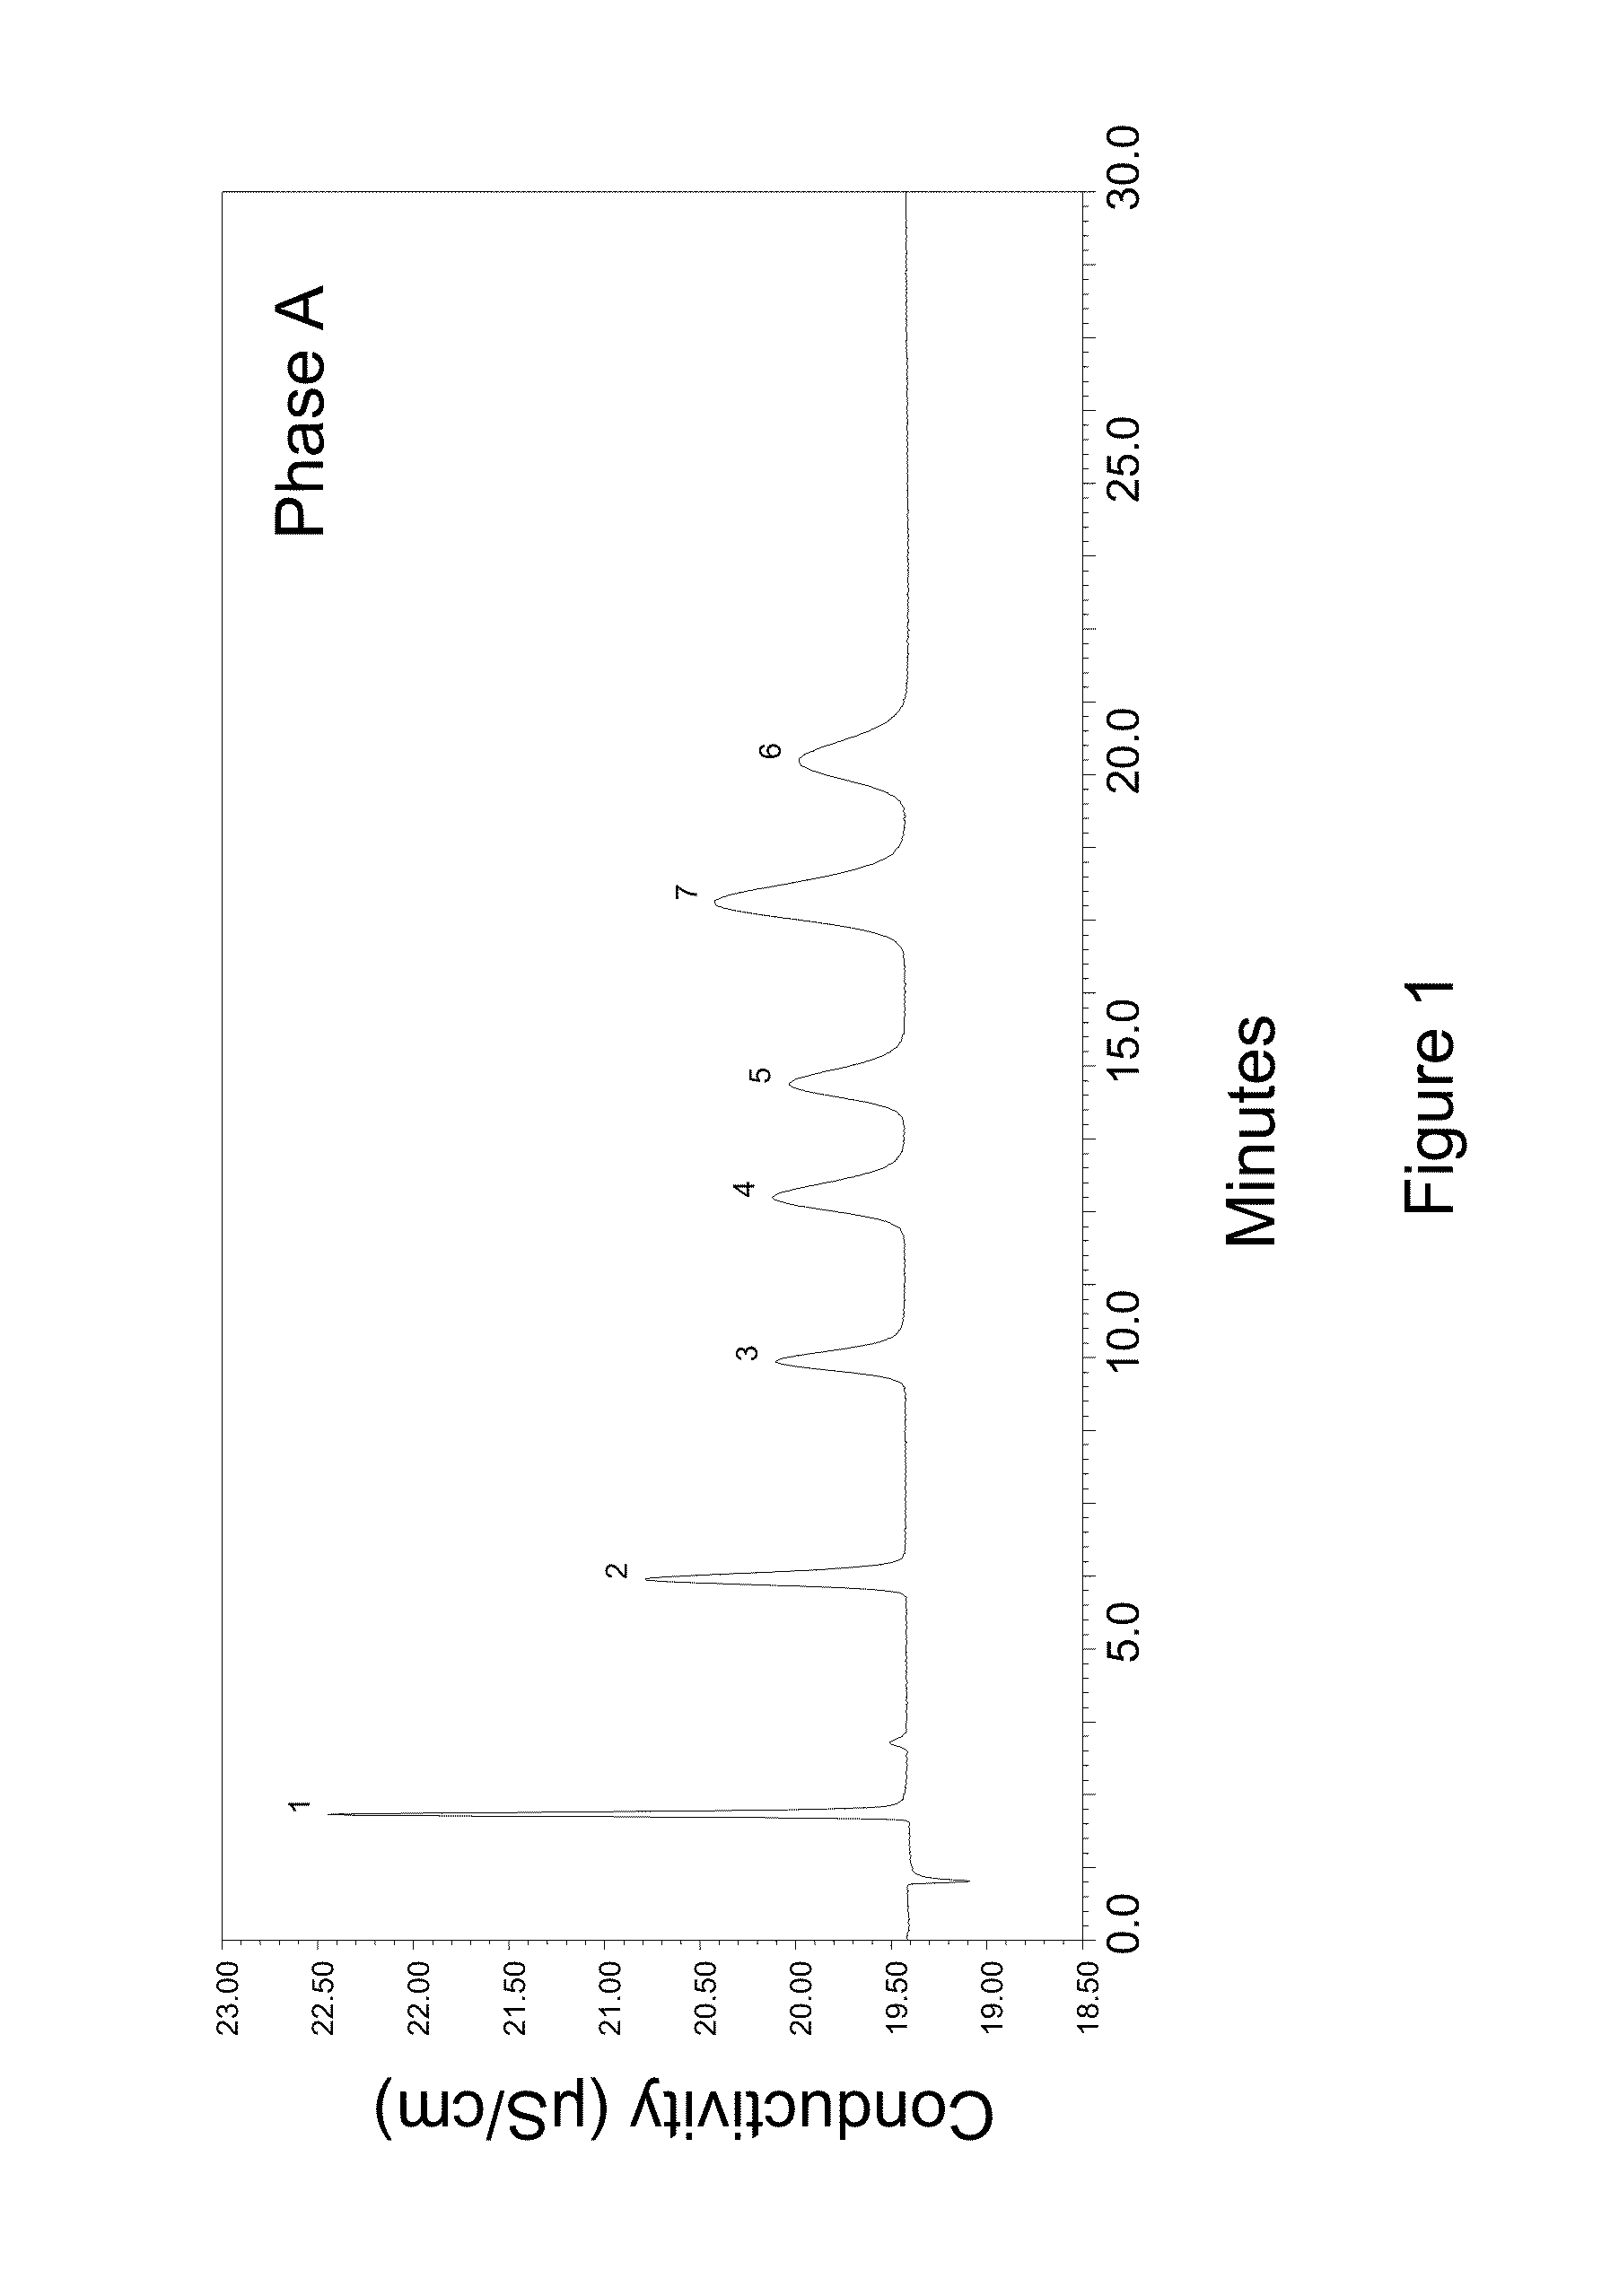 High capacity ion chromatography stationary phases and method of forming